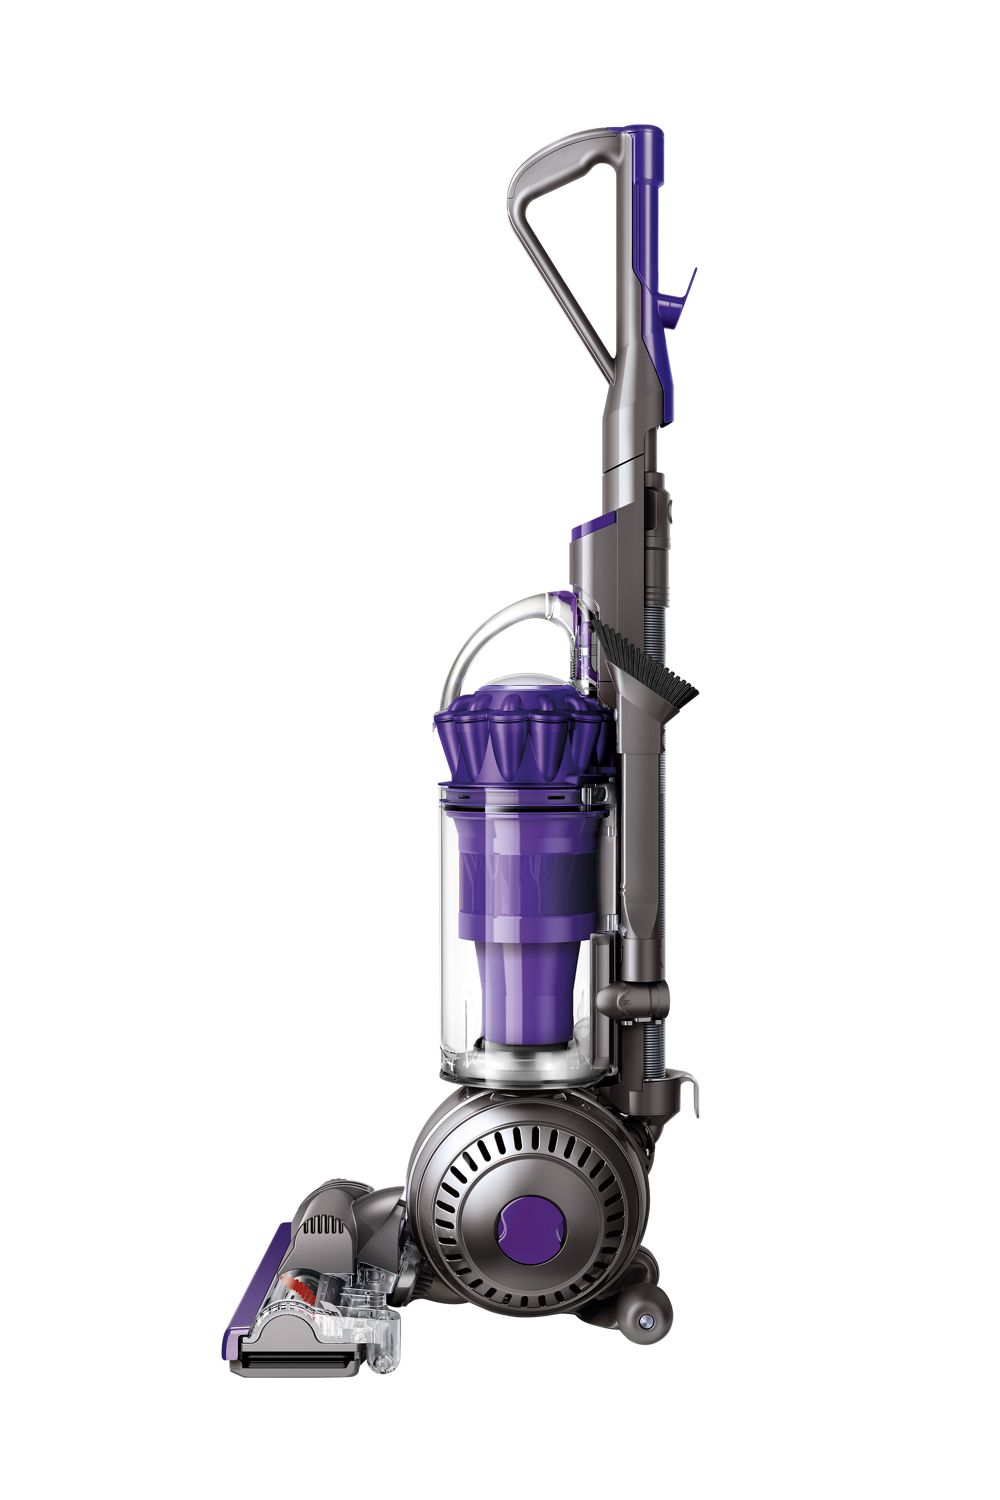 Details about   Dyson 21603401 Silver/Purple Slim Ball Animal Bagless Upright Vacuum 